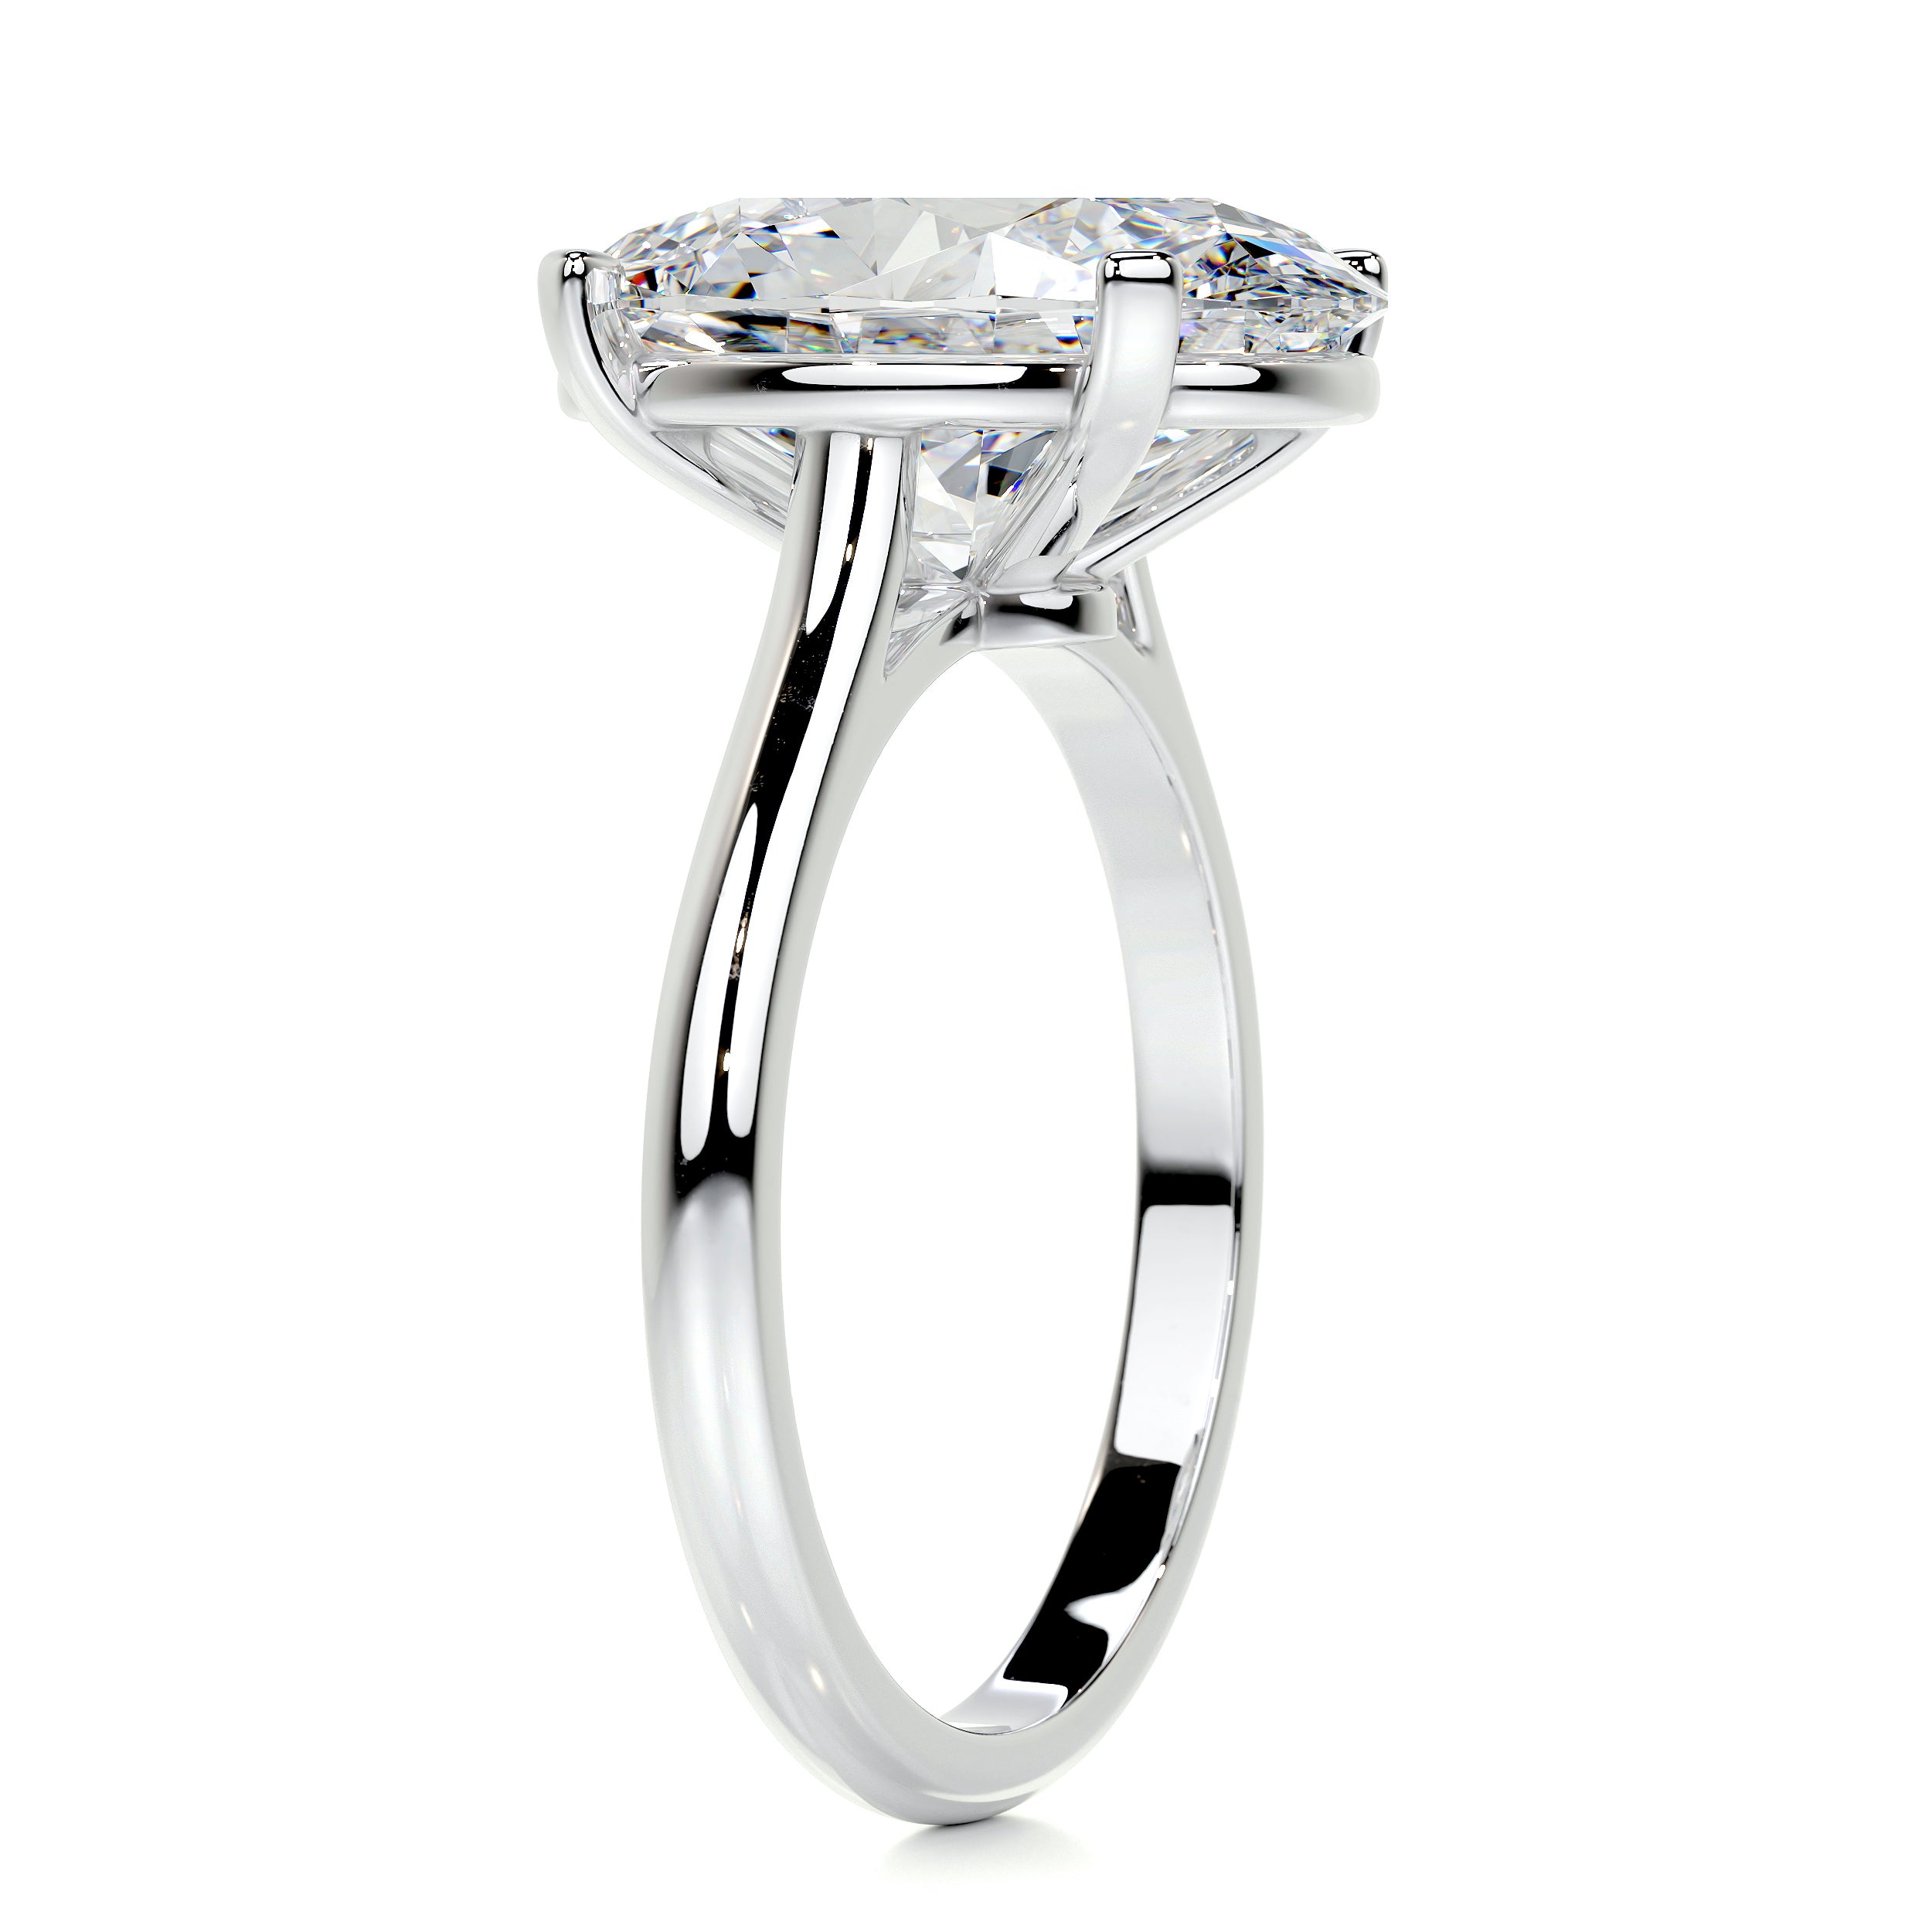 Smyoue 1ct Genuine Moissanite Solitaire Ring for Women Colorless